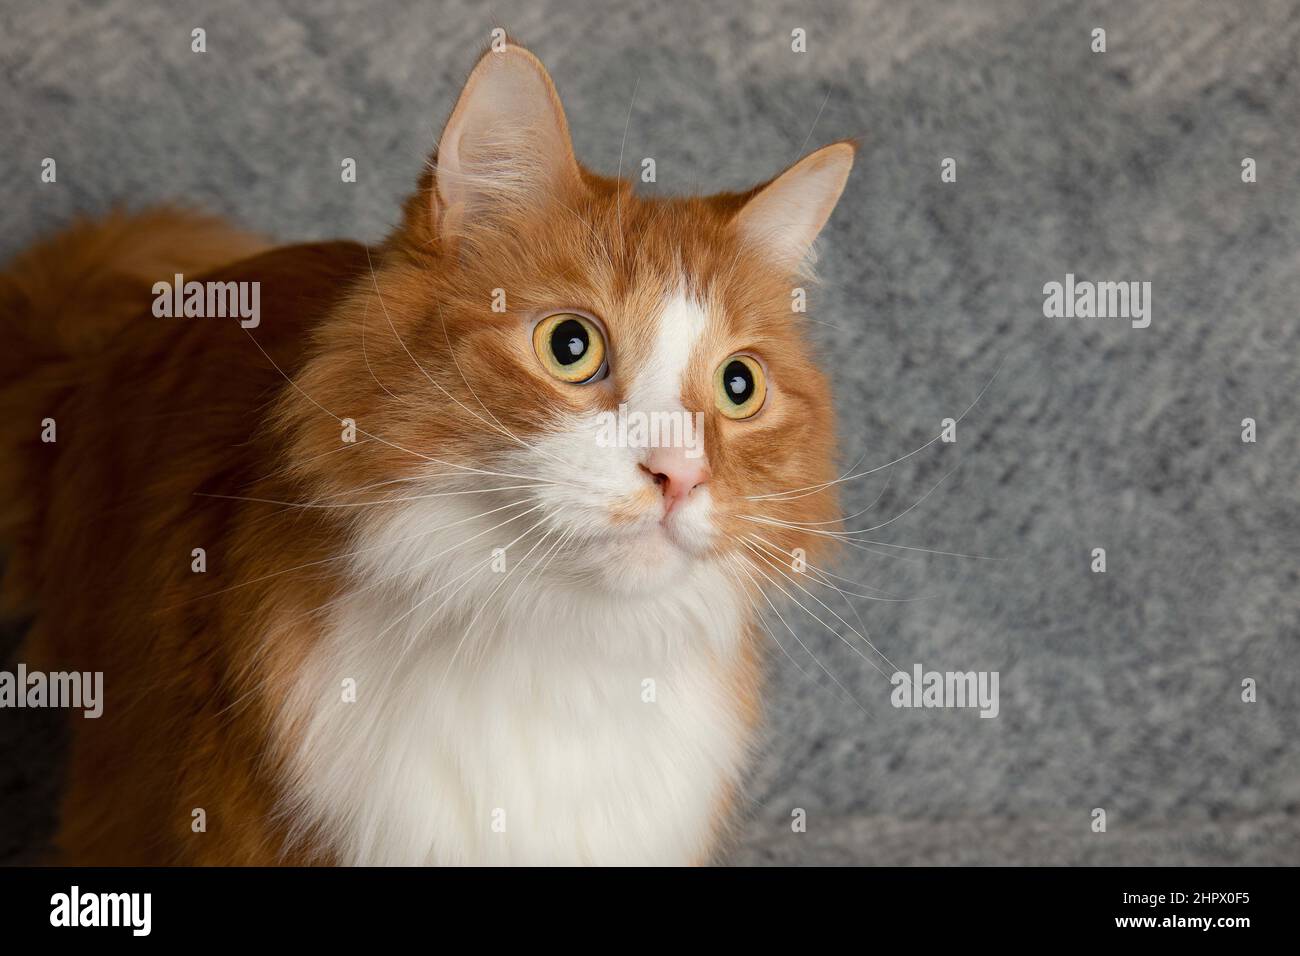 orange and white cute cat pet close up portrait looking to the right Stock Photo